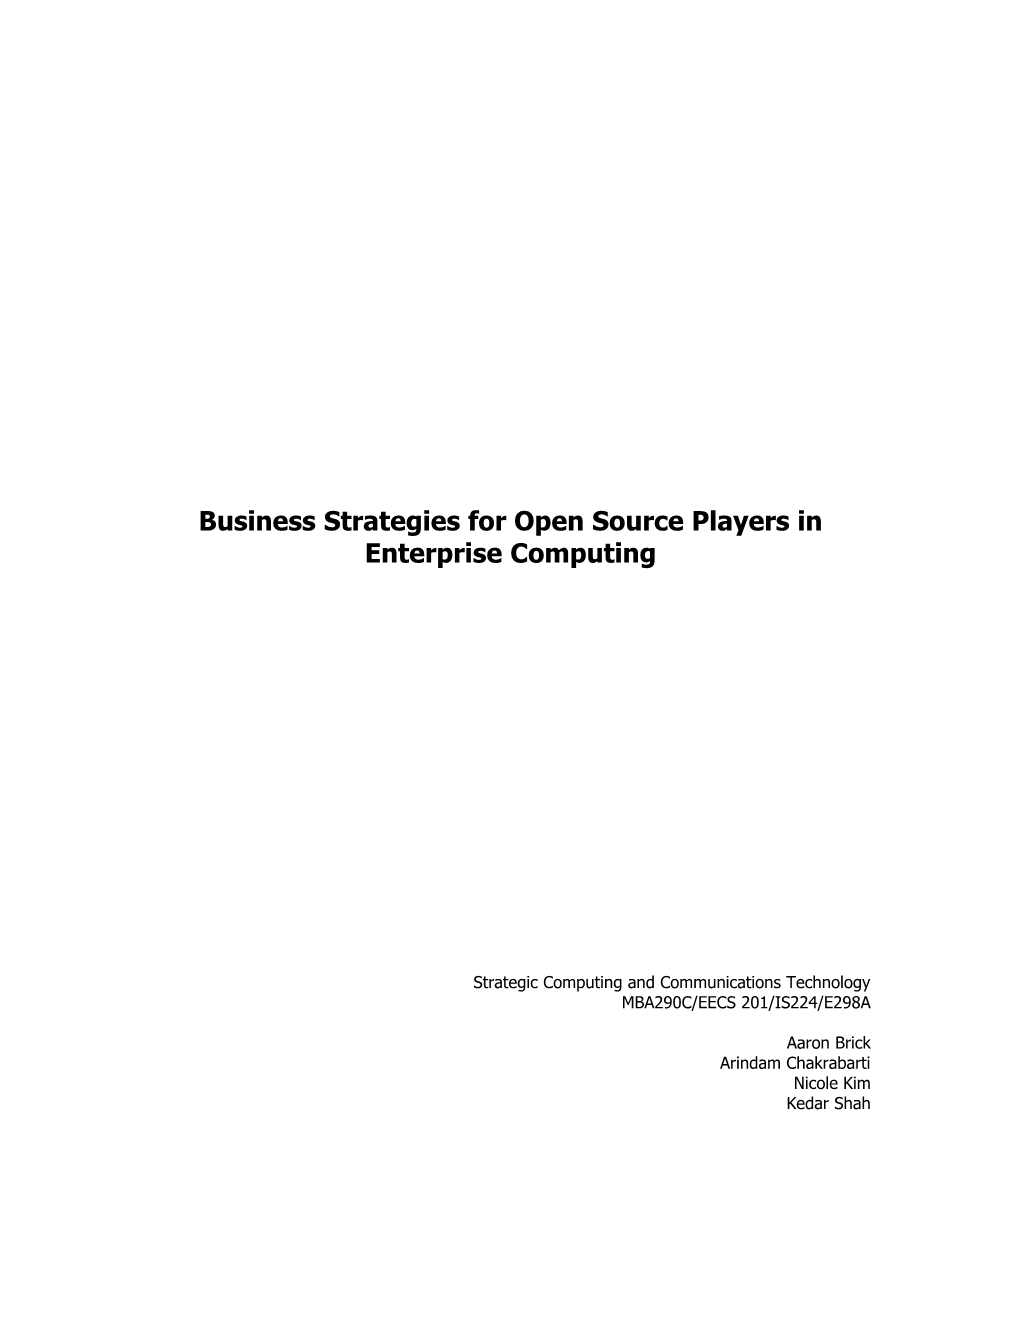 Business Strategies for Open Source Players in Enterprise Computing